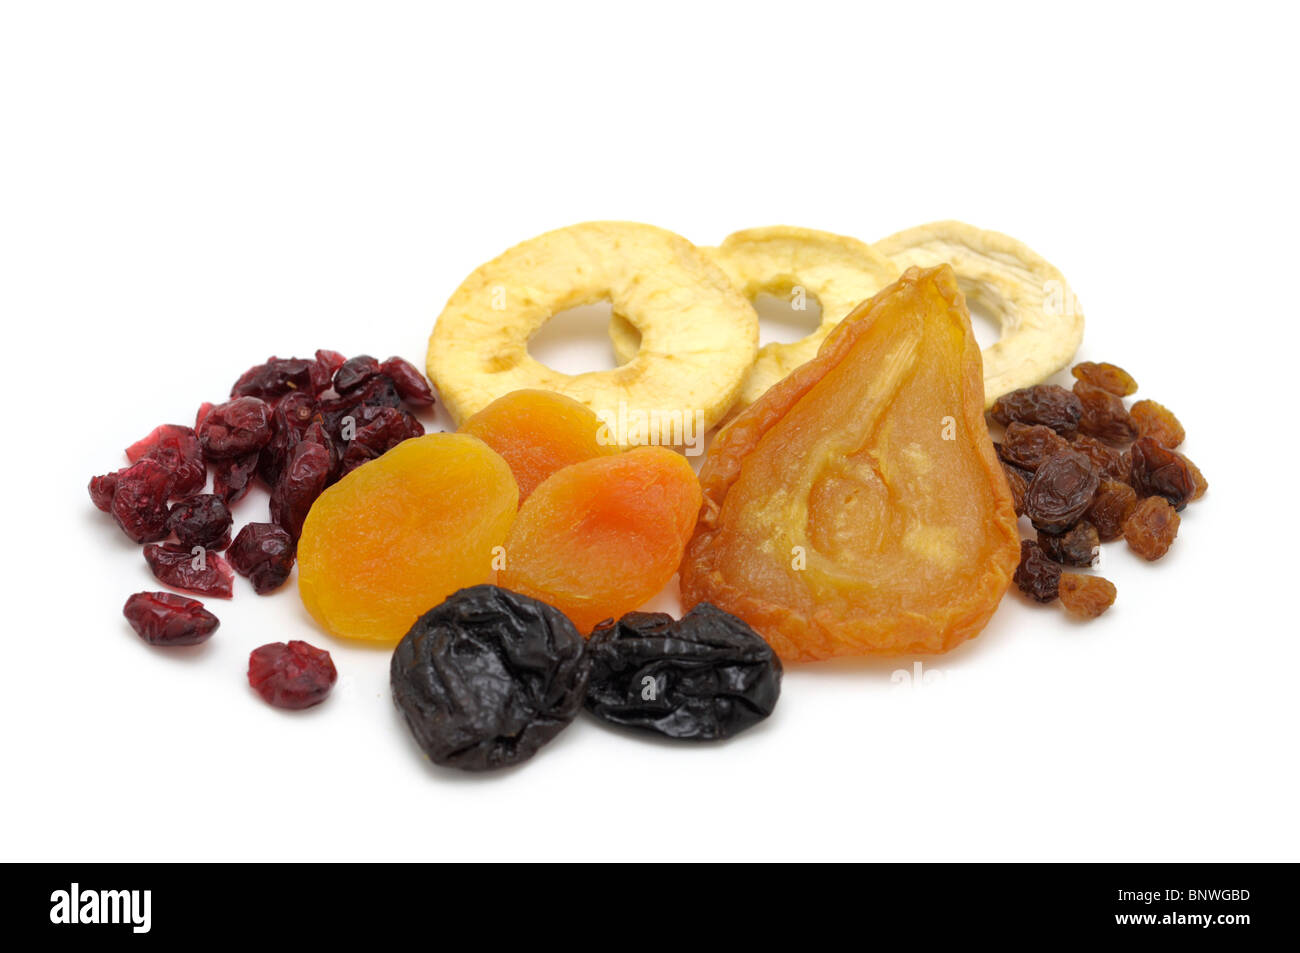 Dried Fruits (Pears, Apple Rings, Cranberries, Apricots, Prunes, Sultanas) Stock Photo